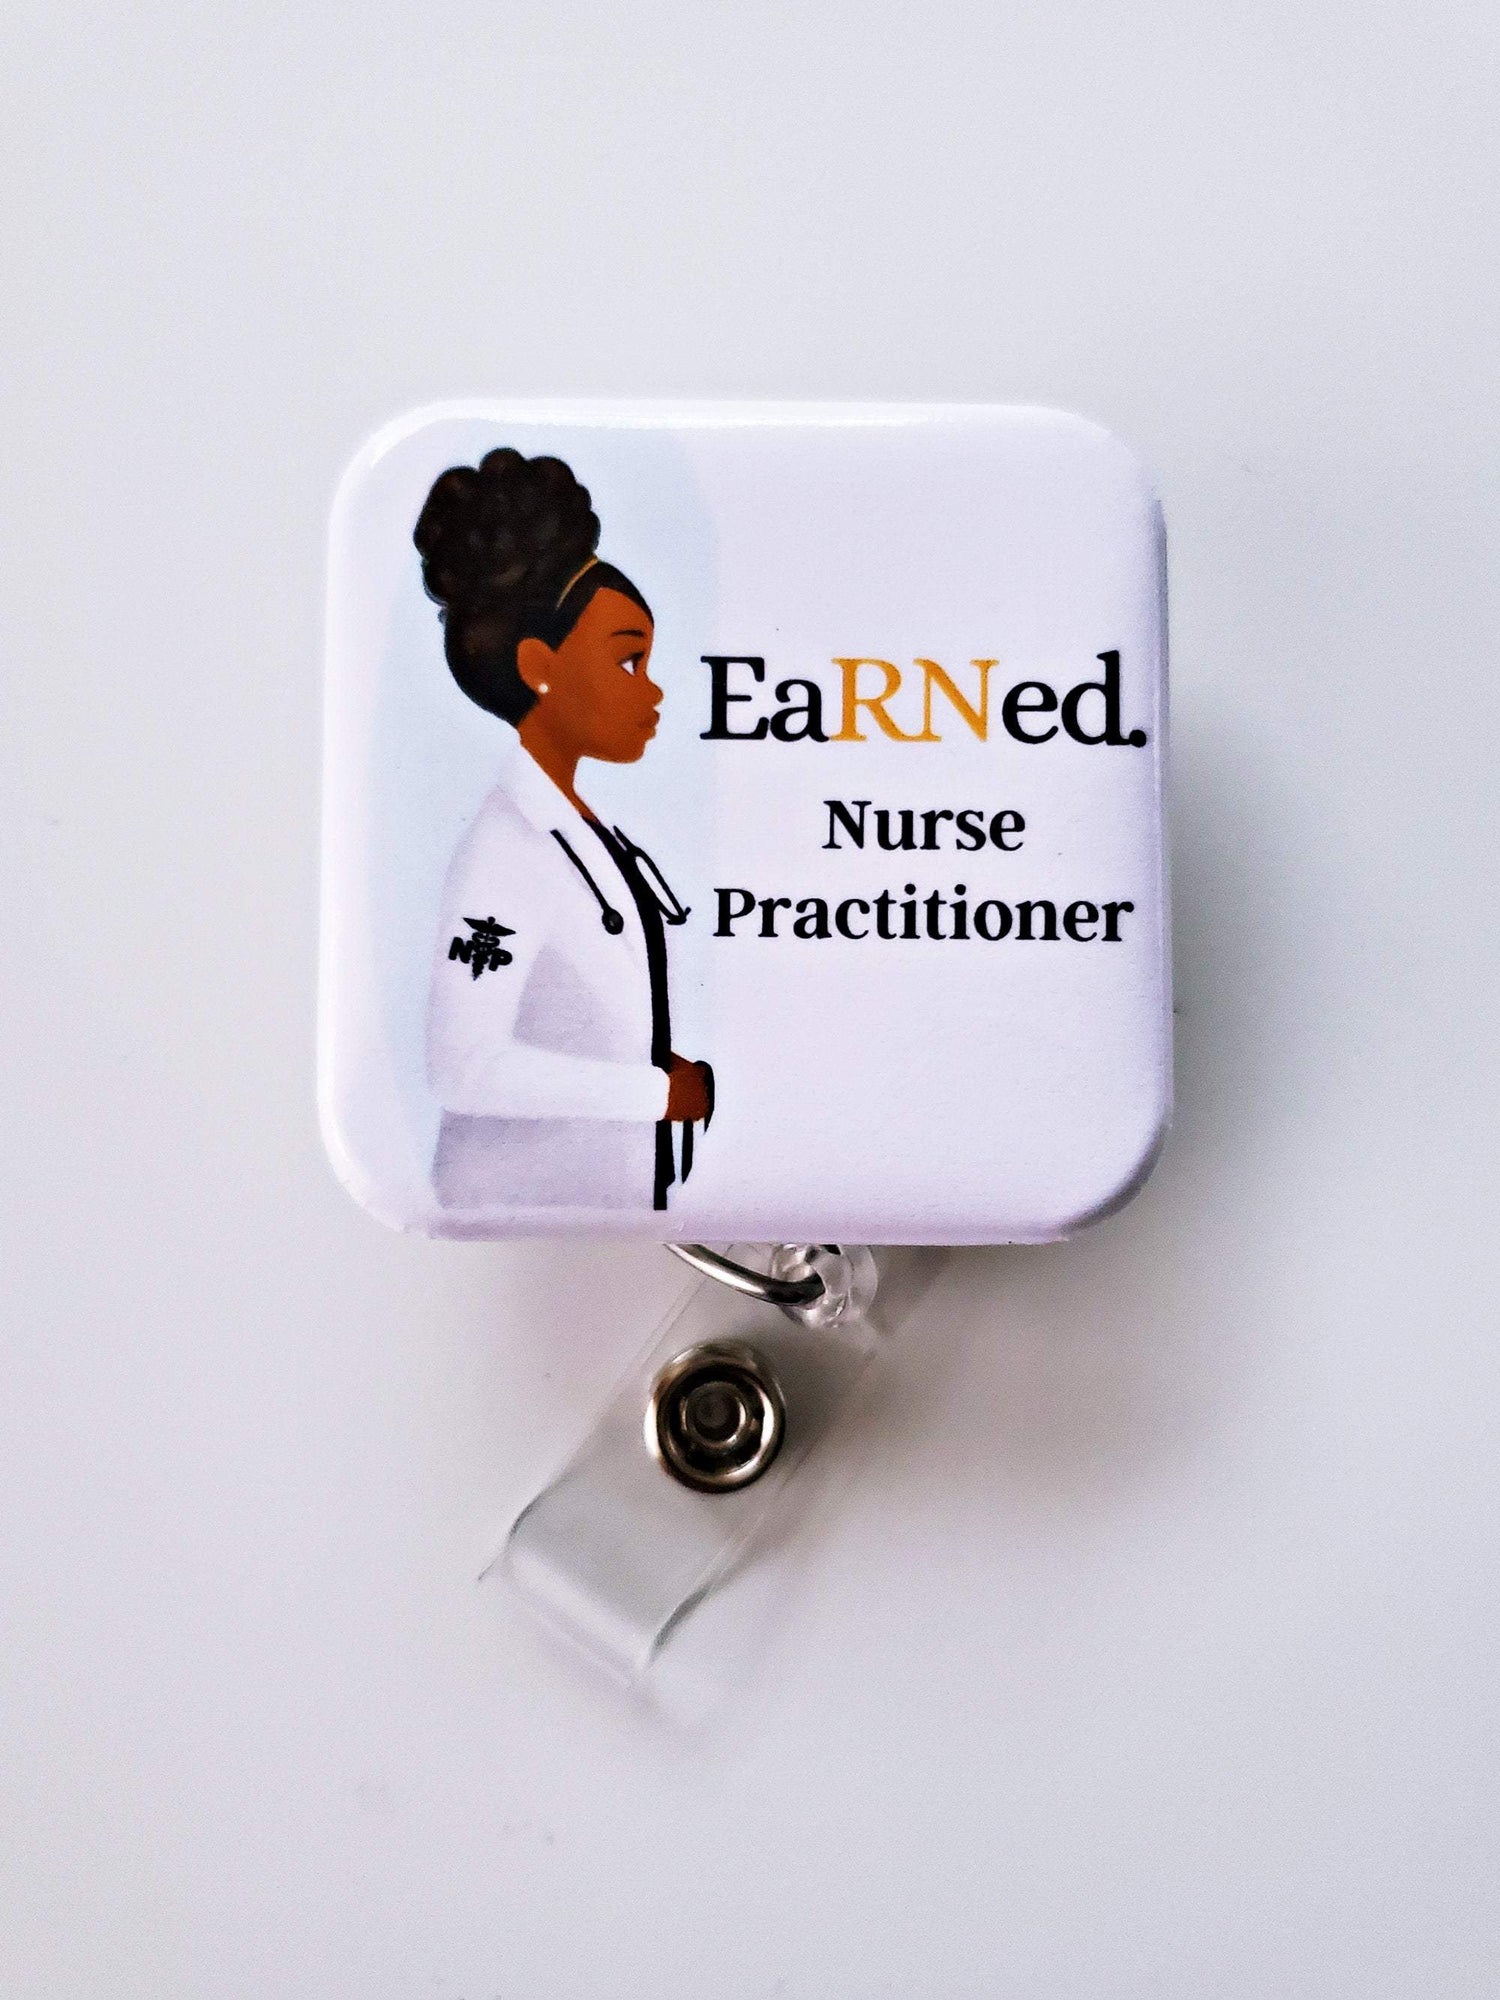 Nurse Practitioner EaRNed. Retractable ID Badge Badge - Reflections By Zana